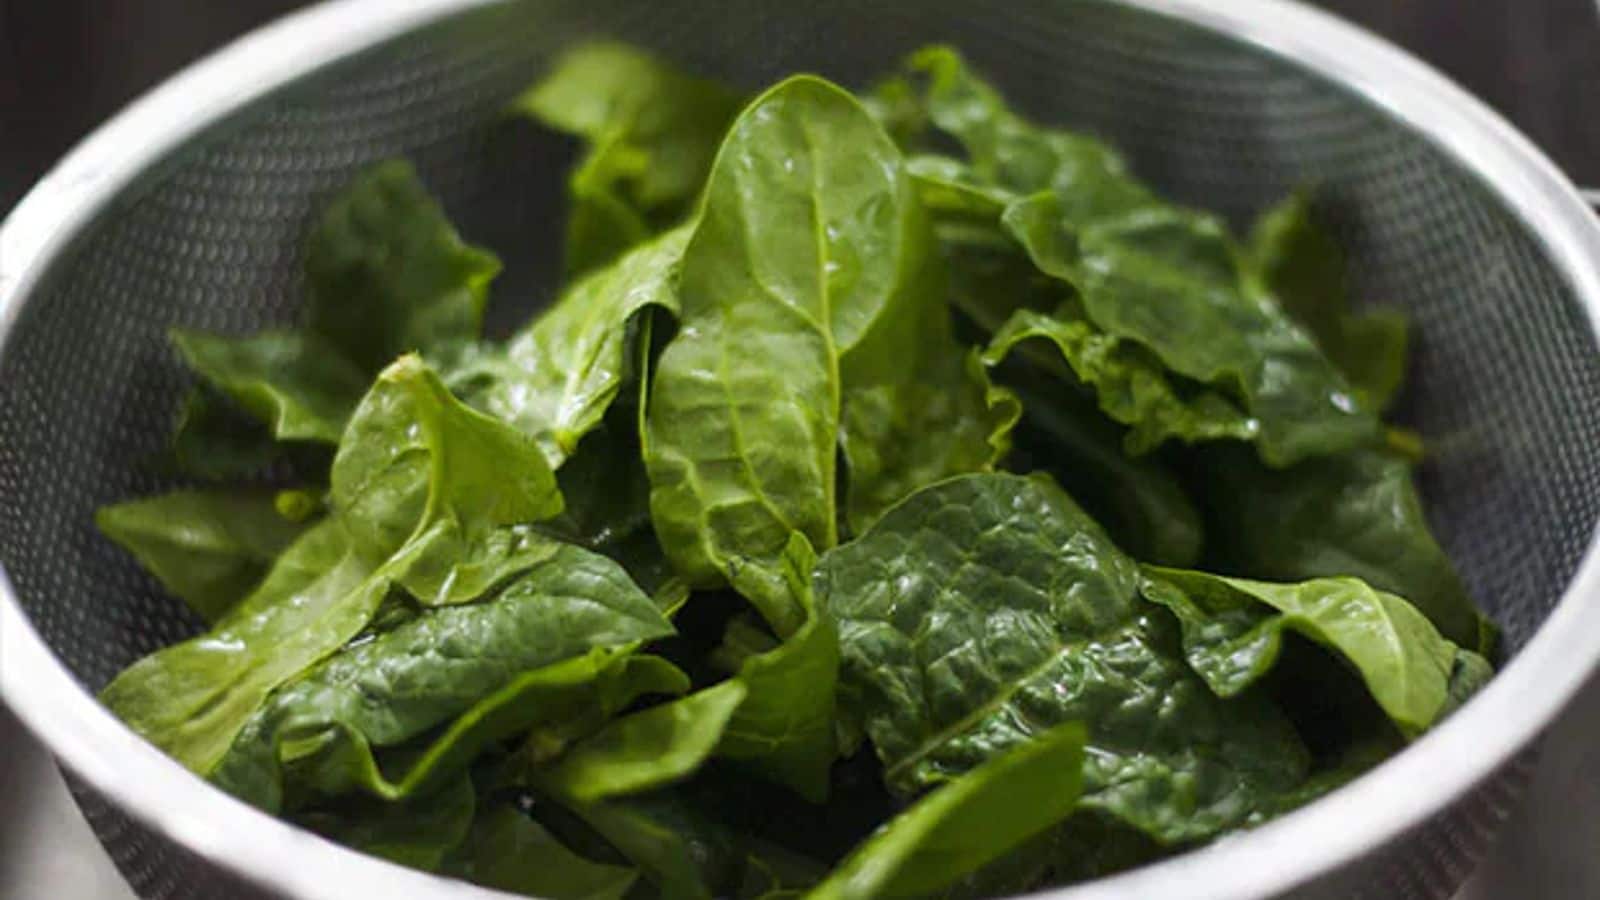 Boost your iron intake with Swiss chard